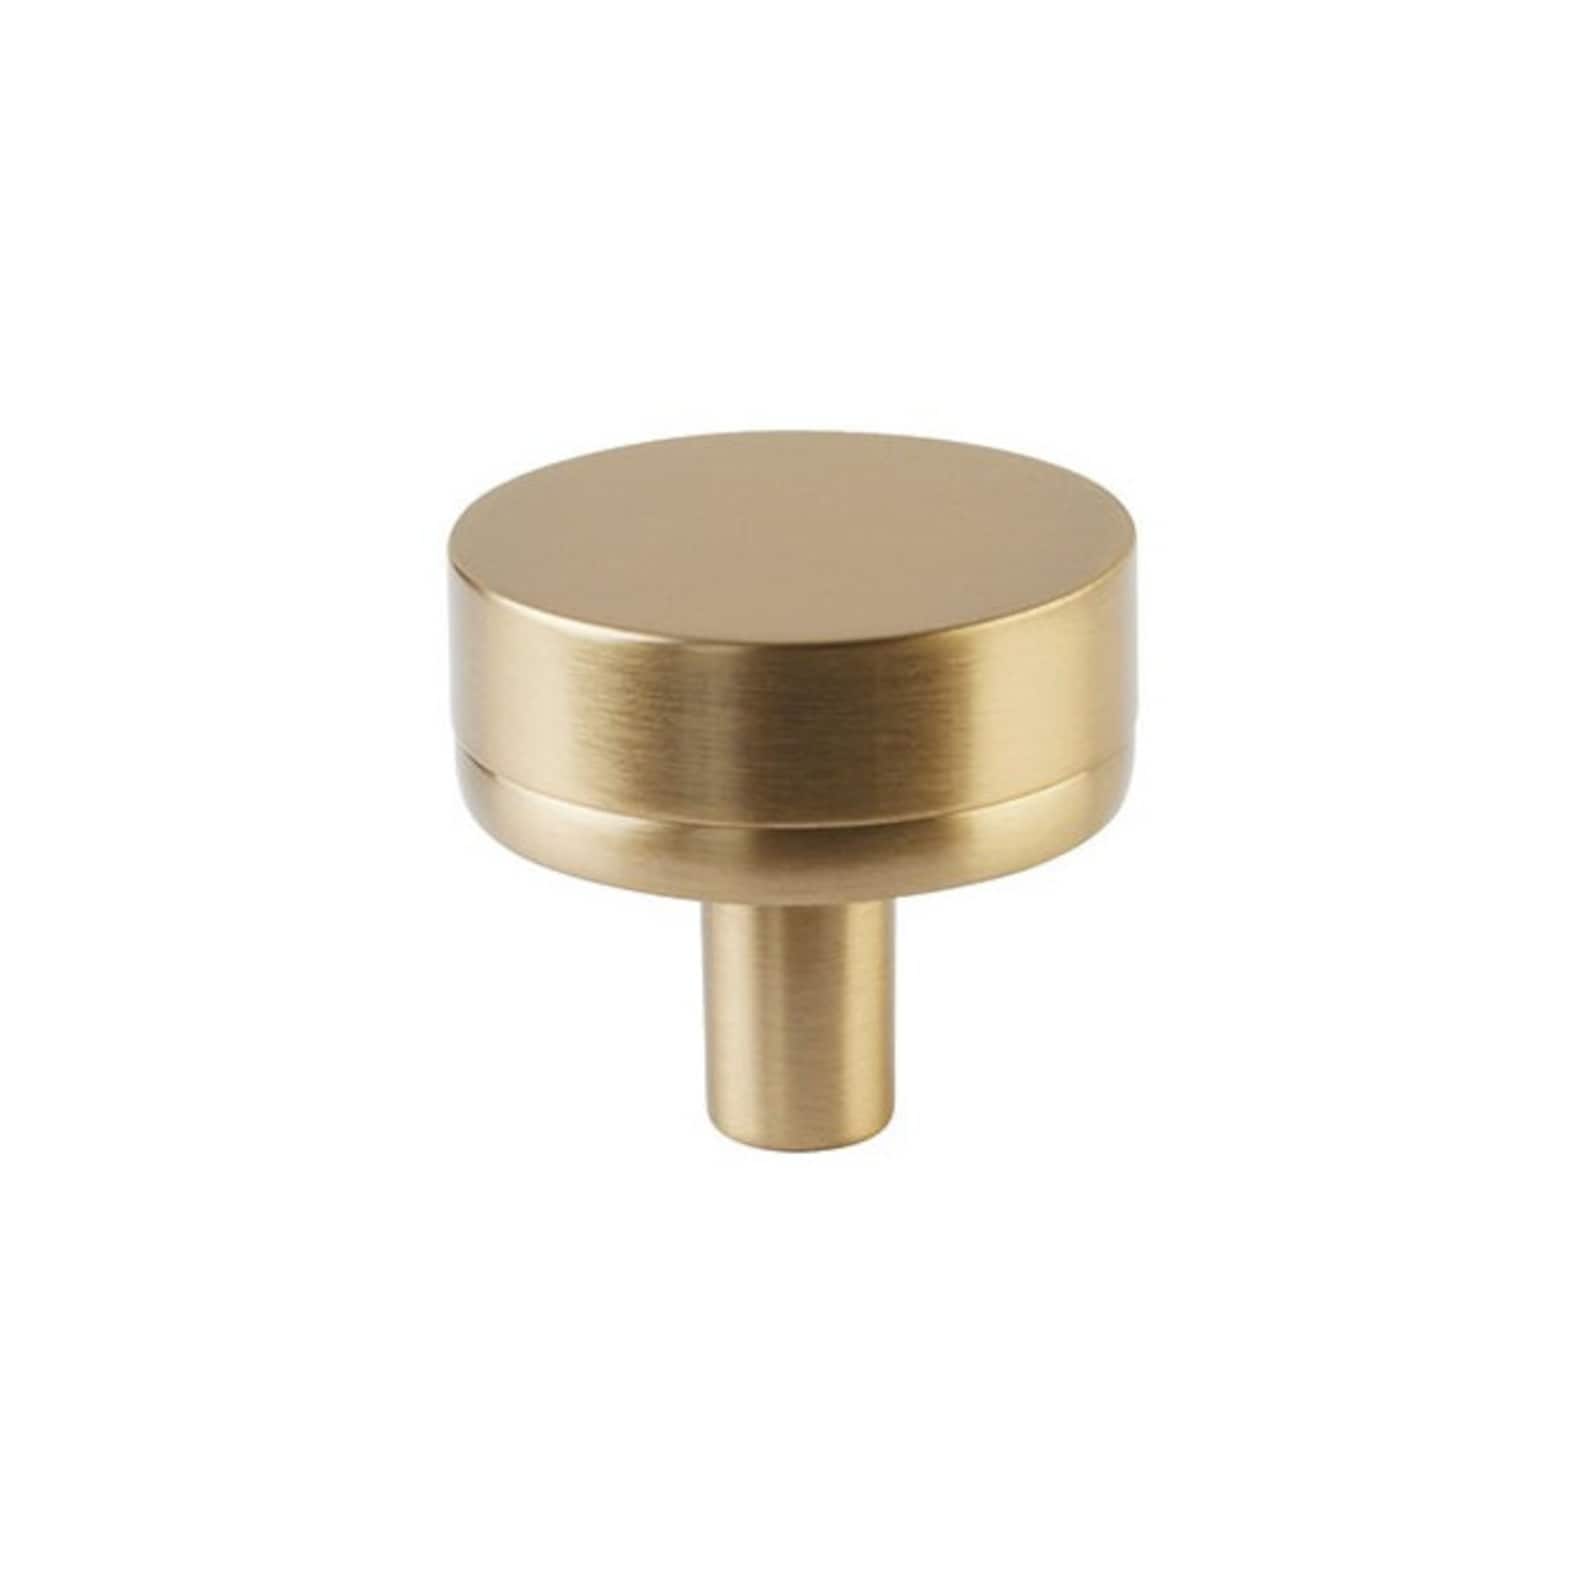 Smooth "Converse No.2" Champagne Bronze Cabinet Knobs and Drawer Pulls